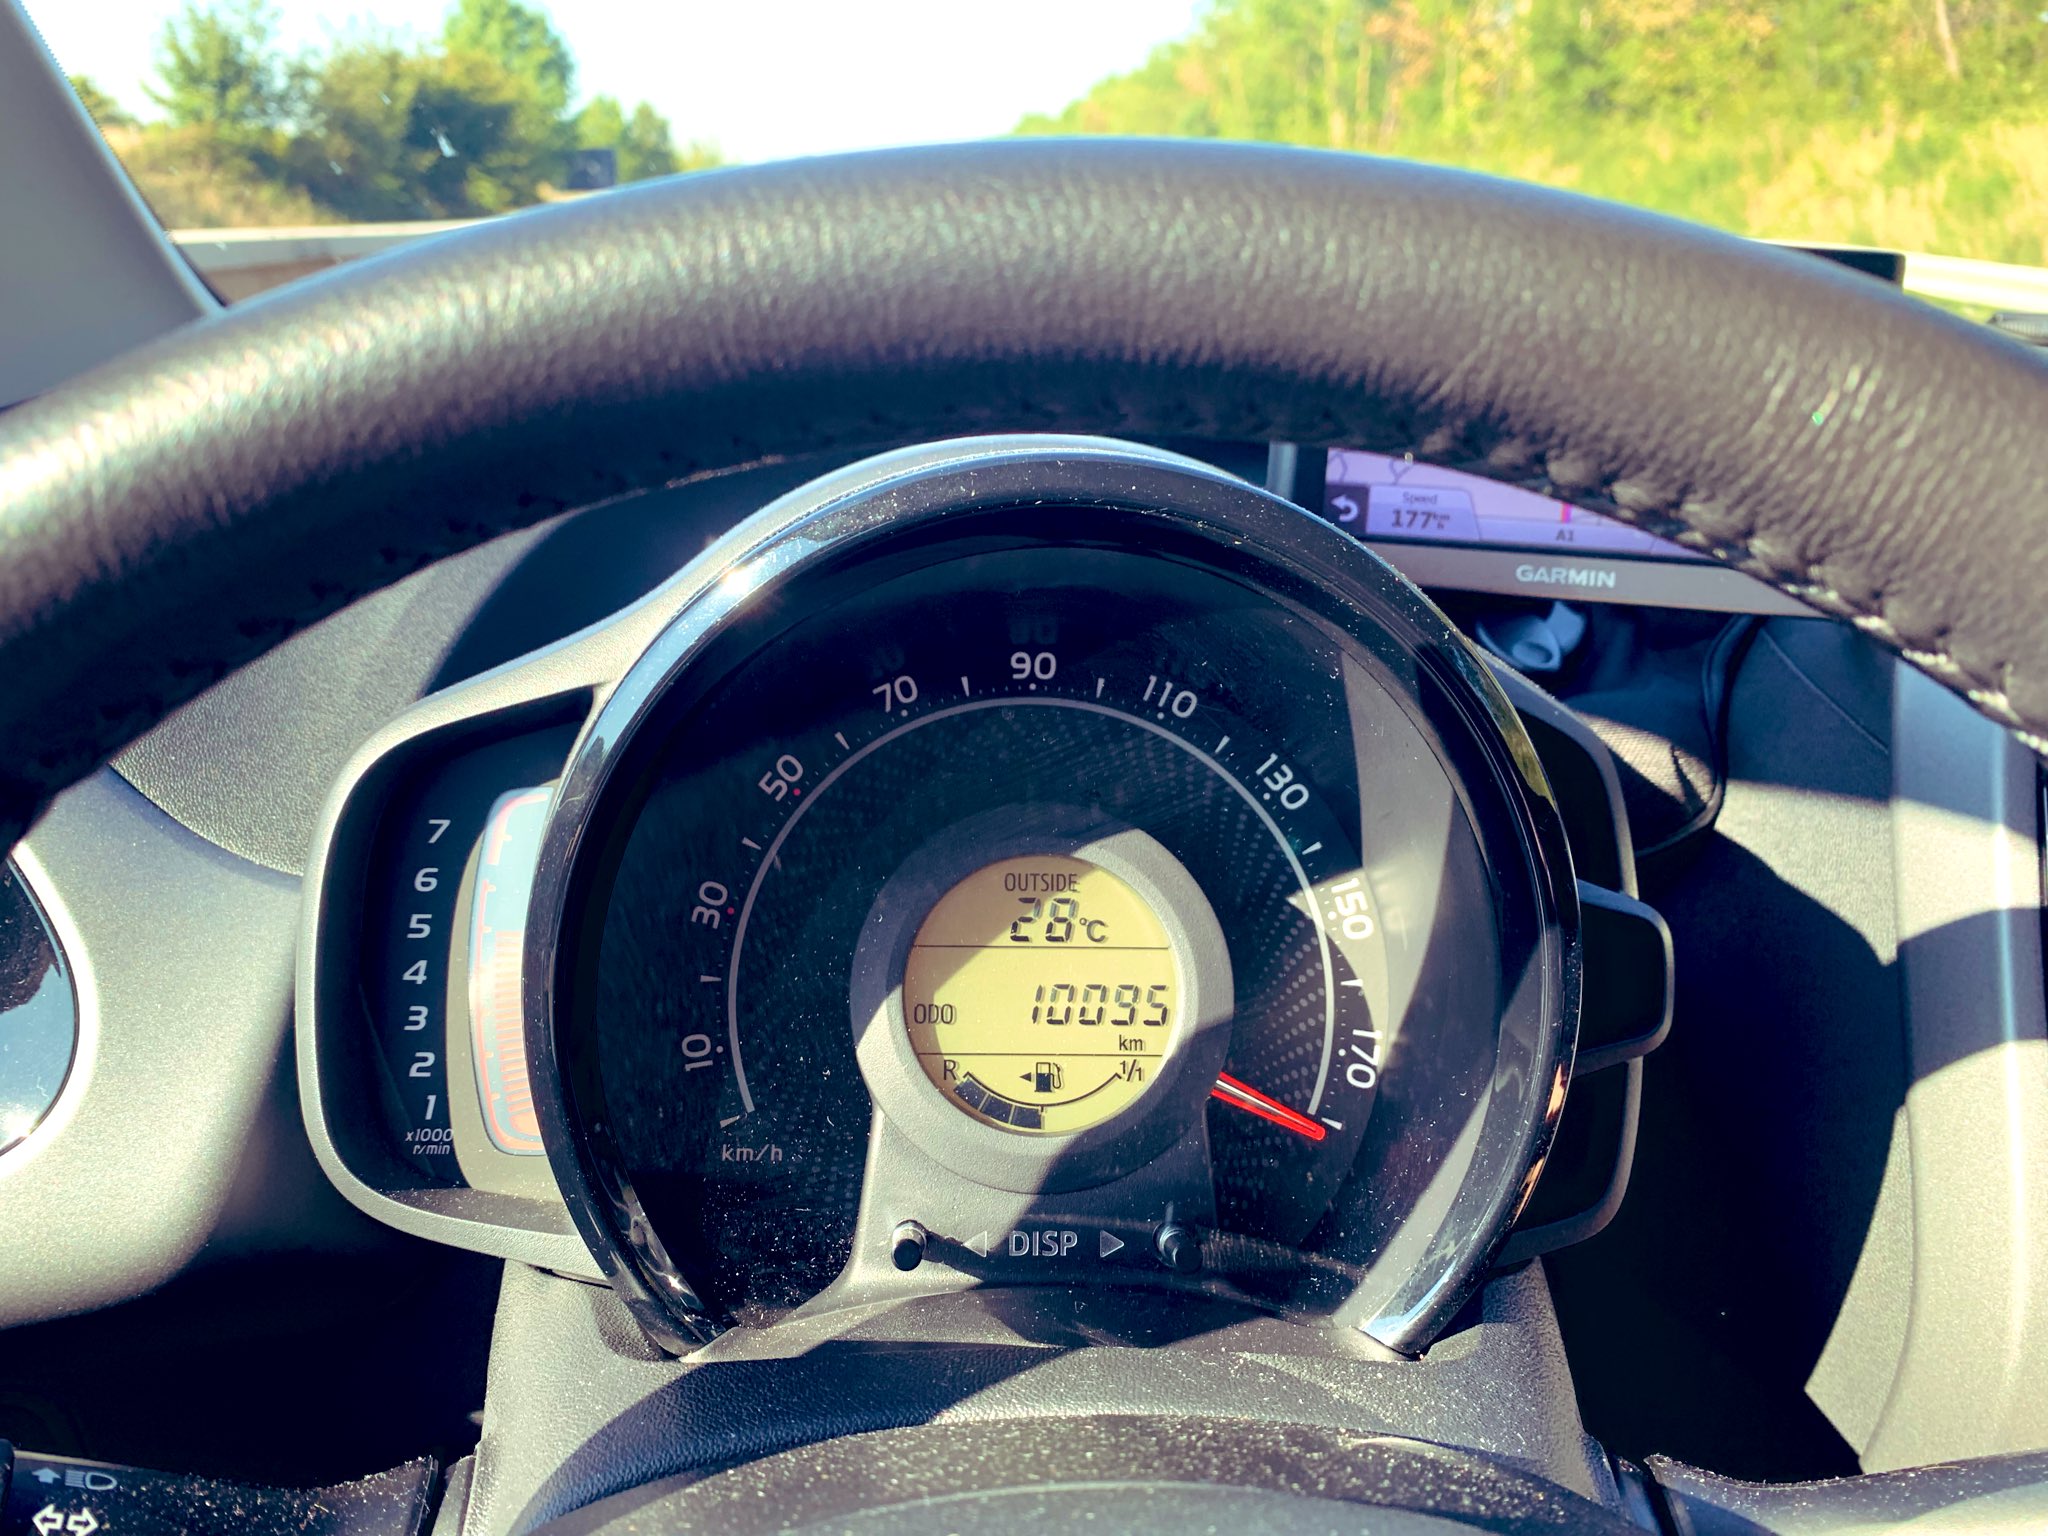 John Gibson on Twitter: "In case anyone is wondering, this is exactly the top speed a Toyota Aygo, downhill, with a tailwind... 😂 That's about km/h or 110 mp/h https://t.co/oBVyiL3lXF" /